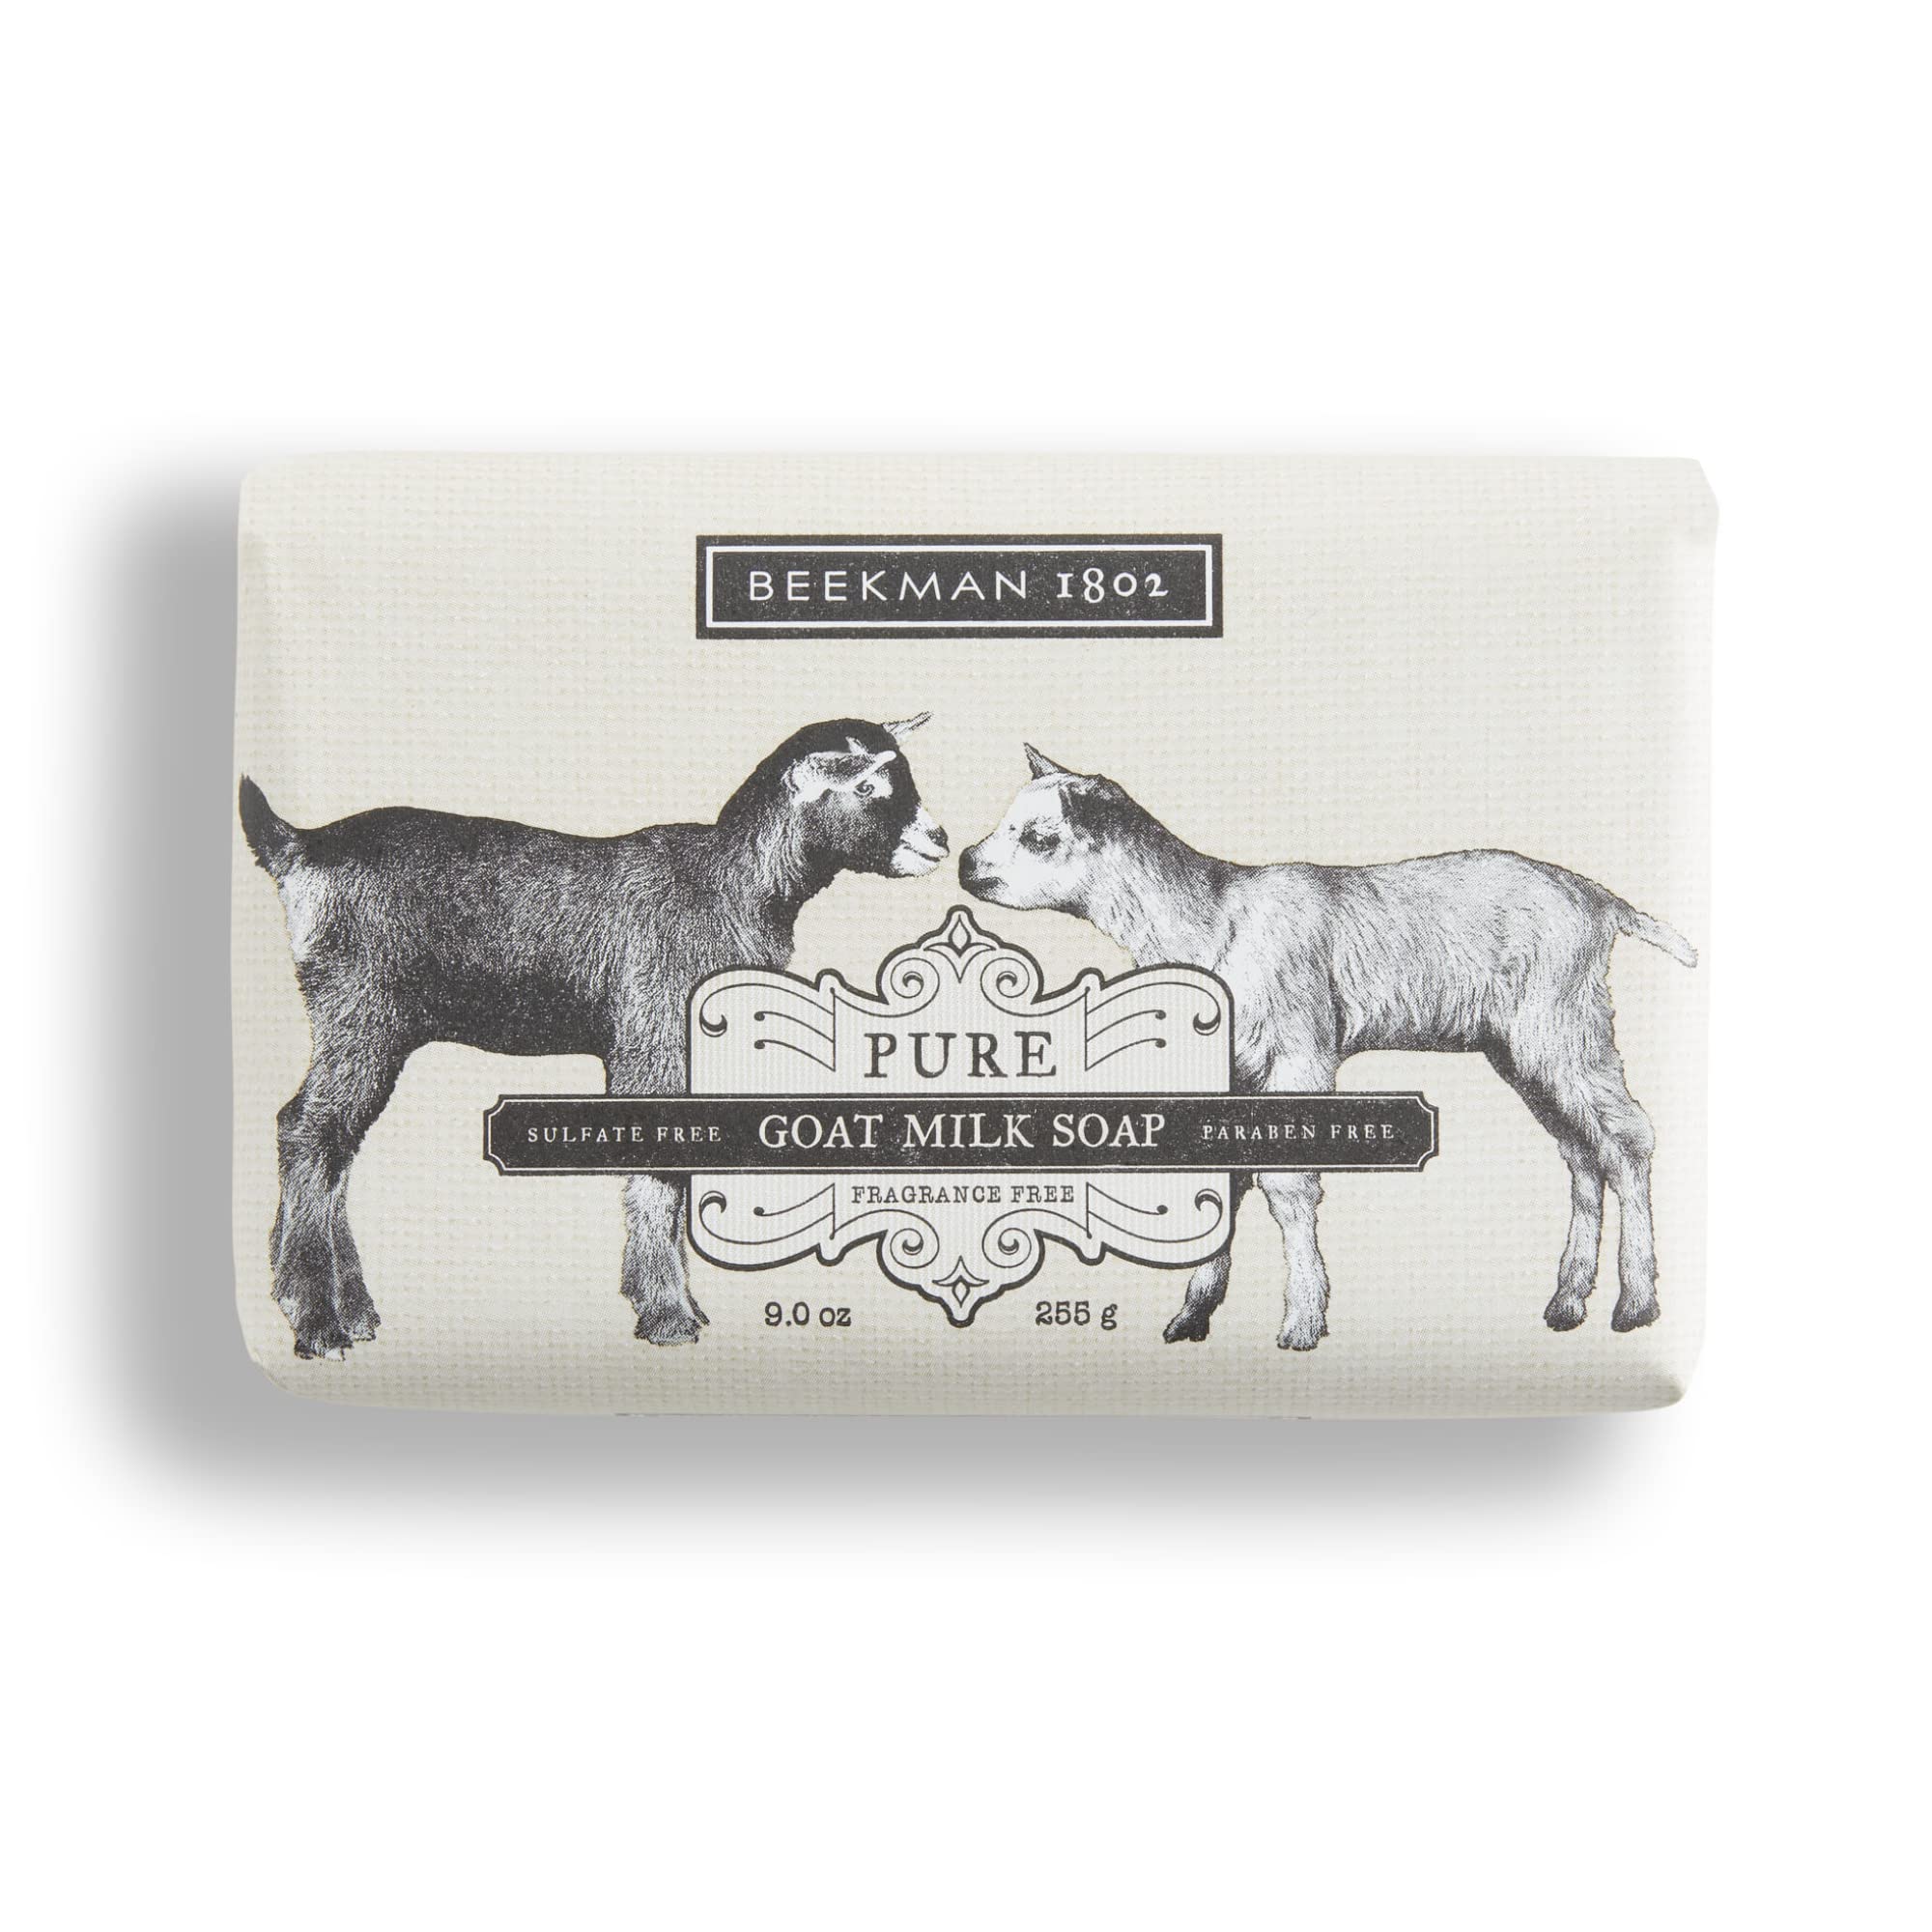 Beekman 1802 Goat Milk Body Soap Bar - 9 oz, Pack of 4 - Nourishes,  Moisturizes & Hydrates - 100% Vegetable Soap with Lactic Acid - Good for  Sensitive